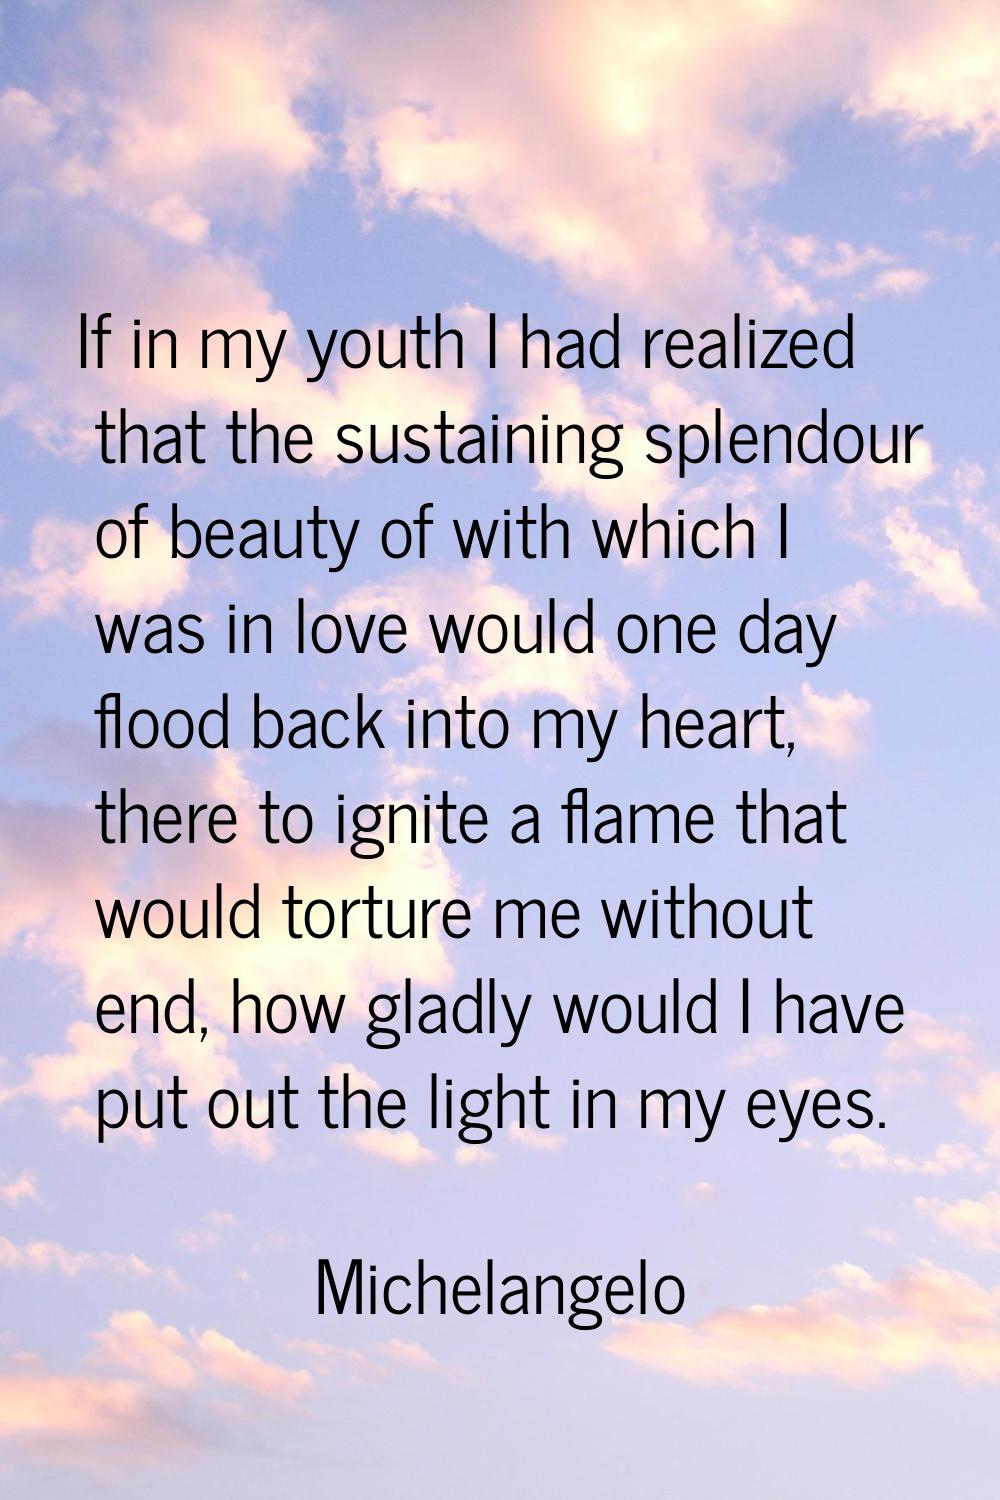 If in my youth I had realized that the sustaining splendour of beauty of with which I was in love w